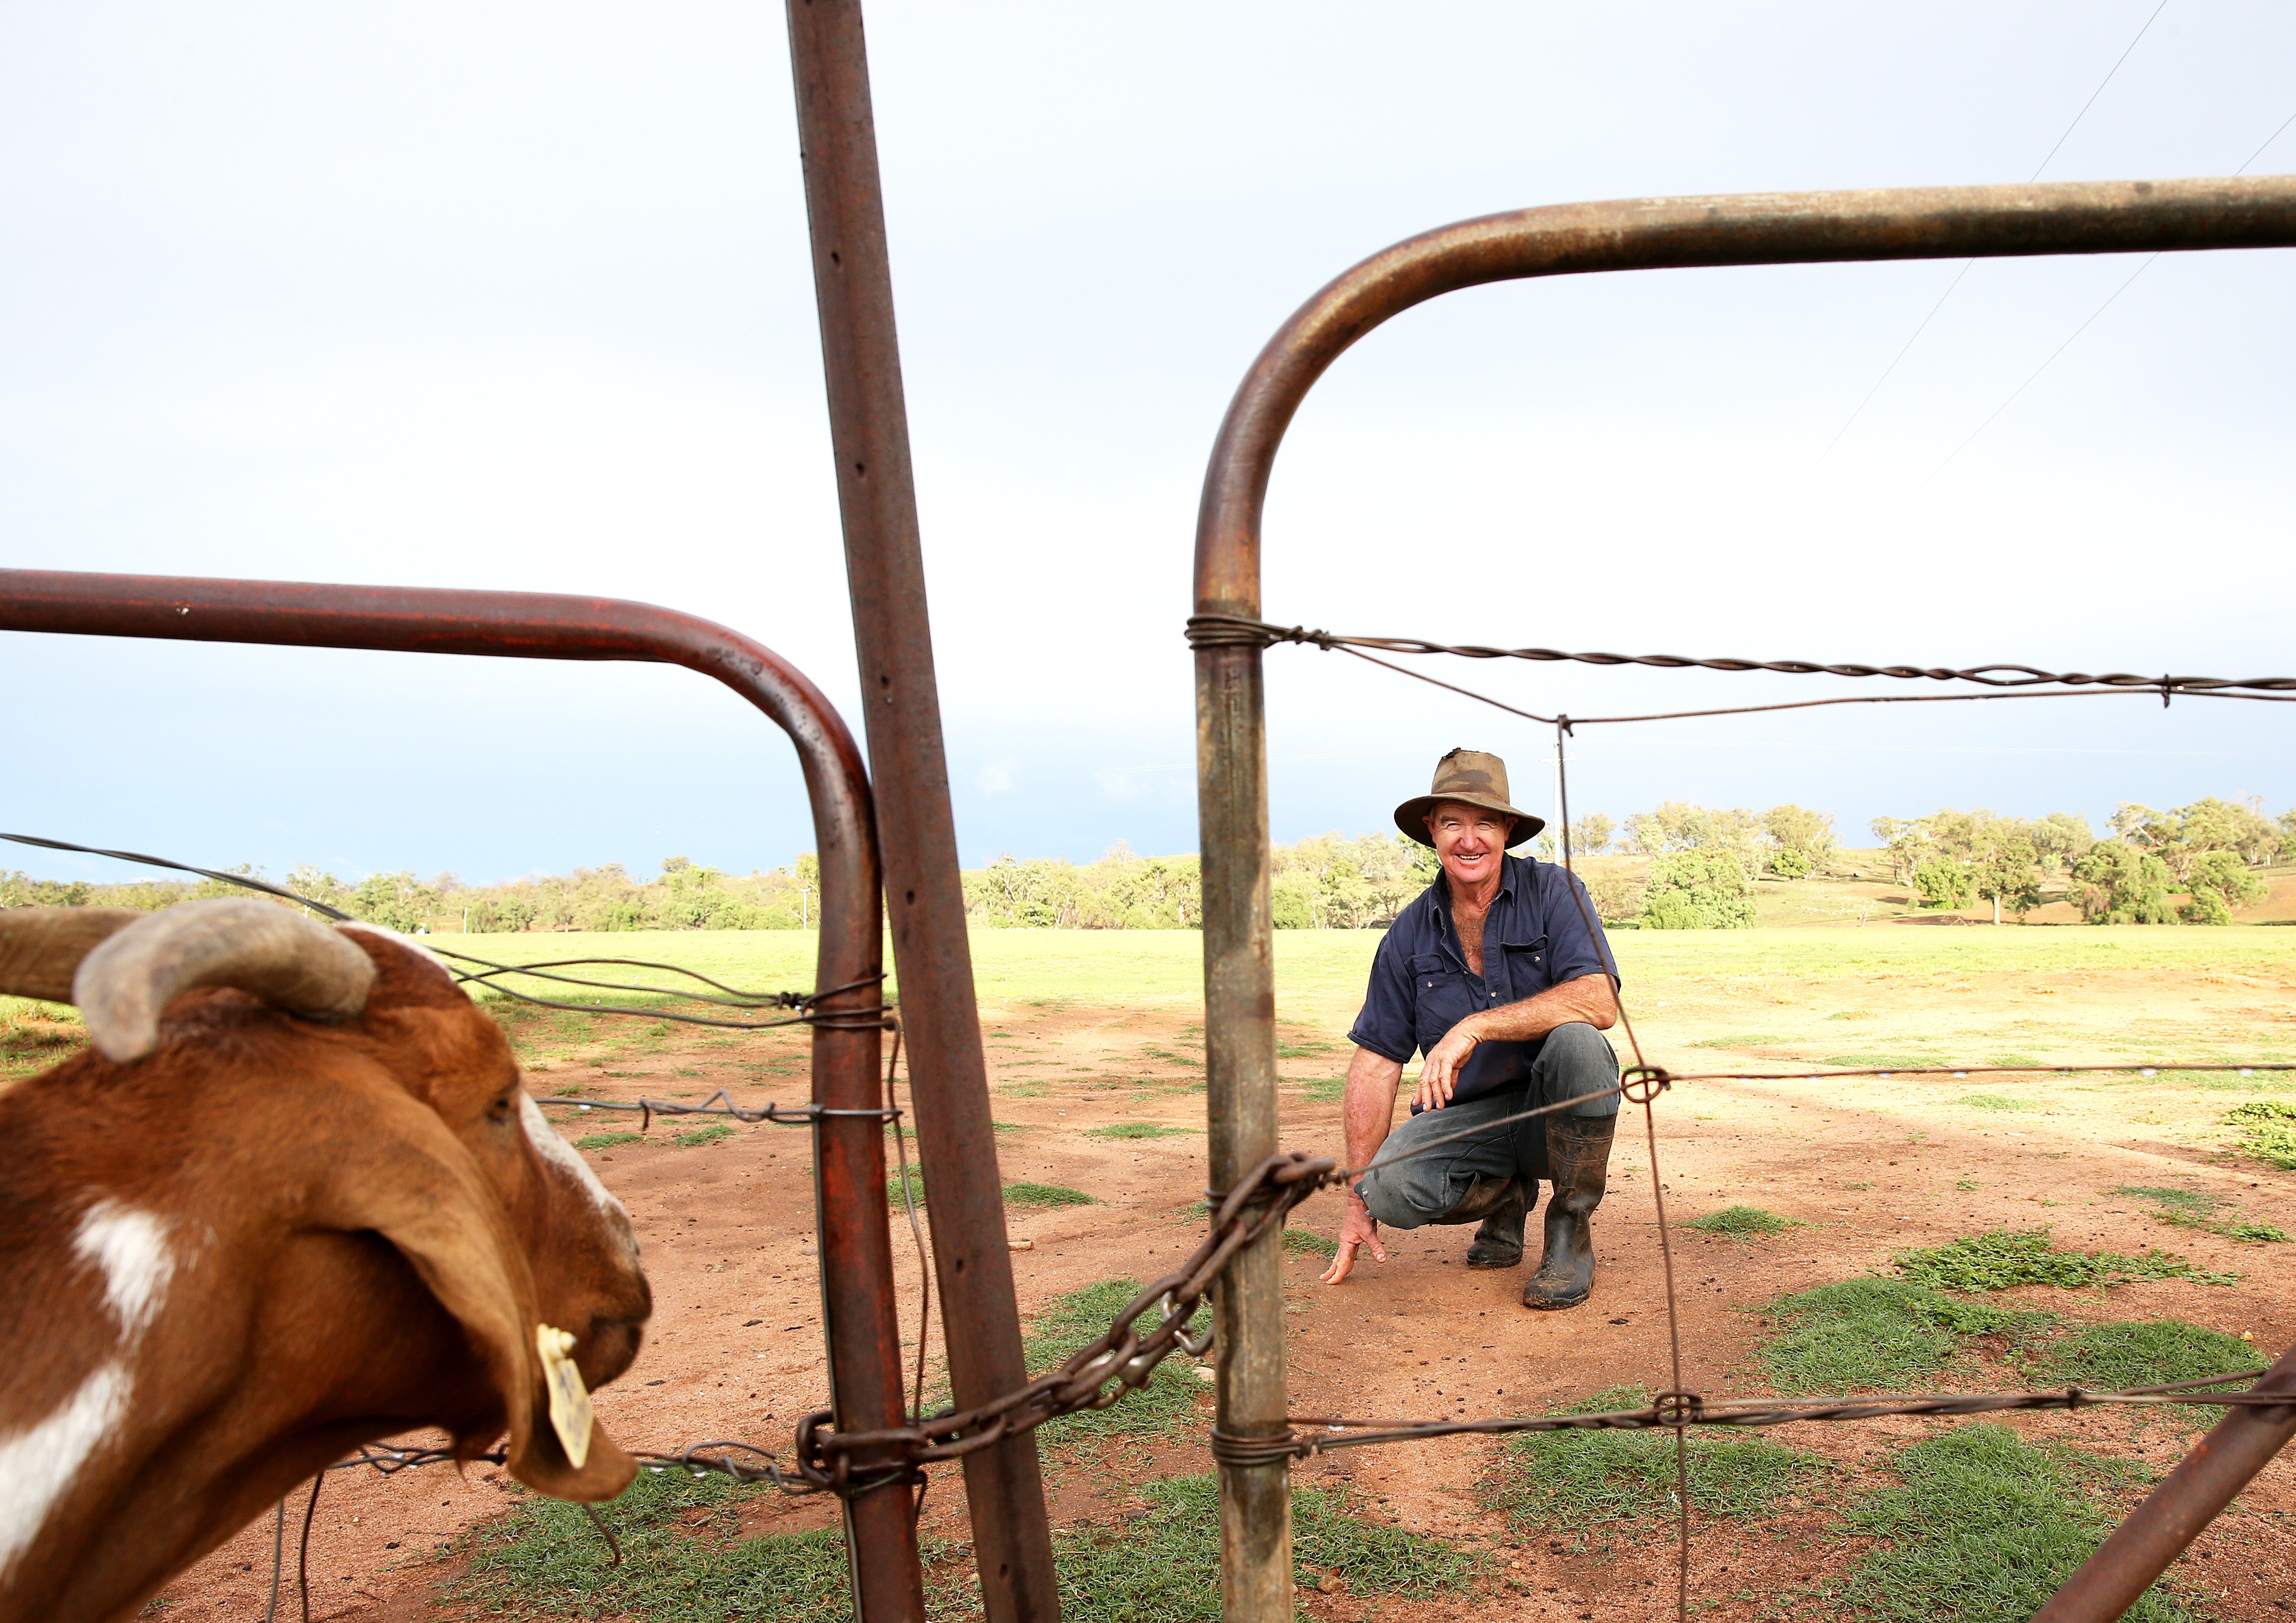 Farmer Les Jones is pictured on his farm in the Goolhi area in north west of NSW, Monday, February 10, 2020 Les Jones received 140mm of rain in the last 10 days. (AAP Image/ Peter Lorimer) NO ARCHIVING